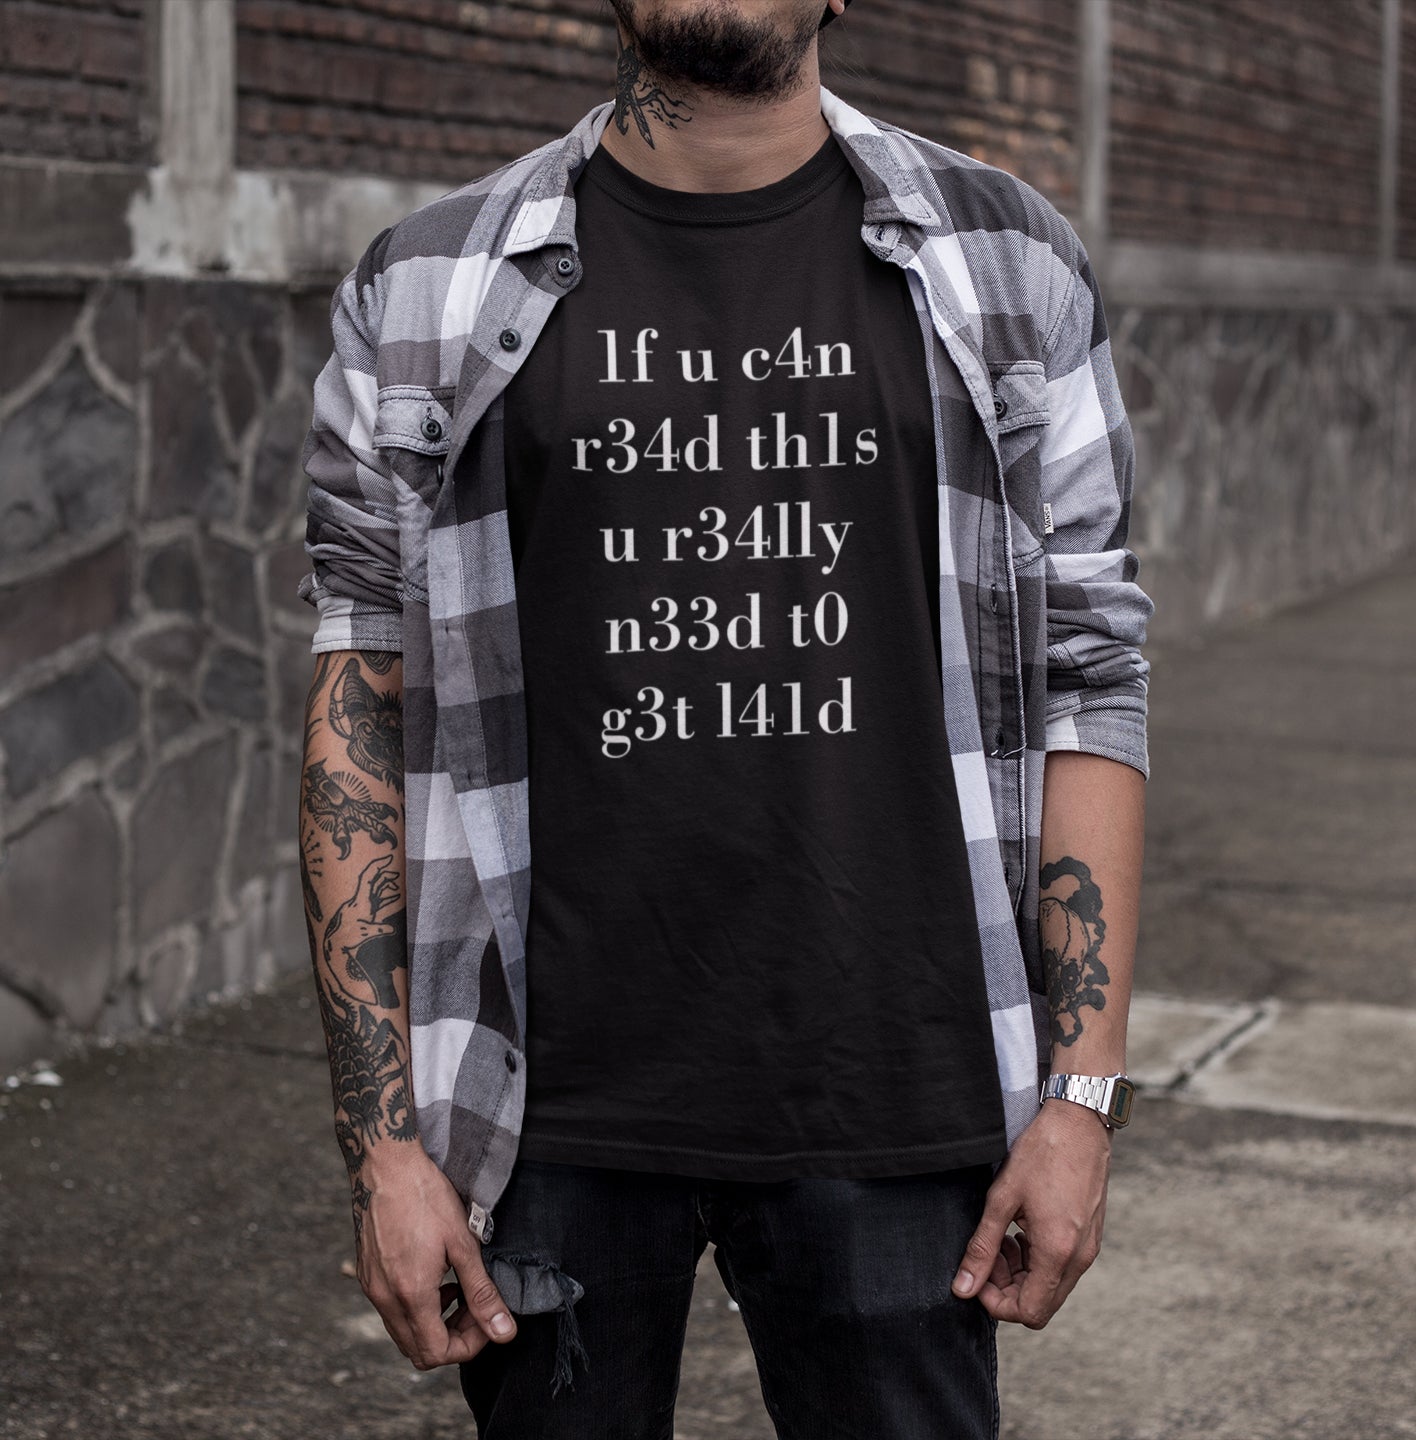 If You Can Read This Leet Speak 1337 Ironic Unisex T-Shirt